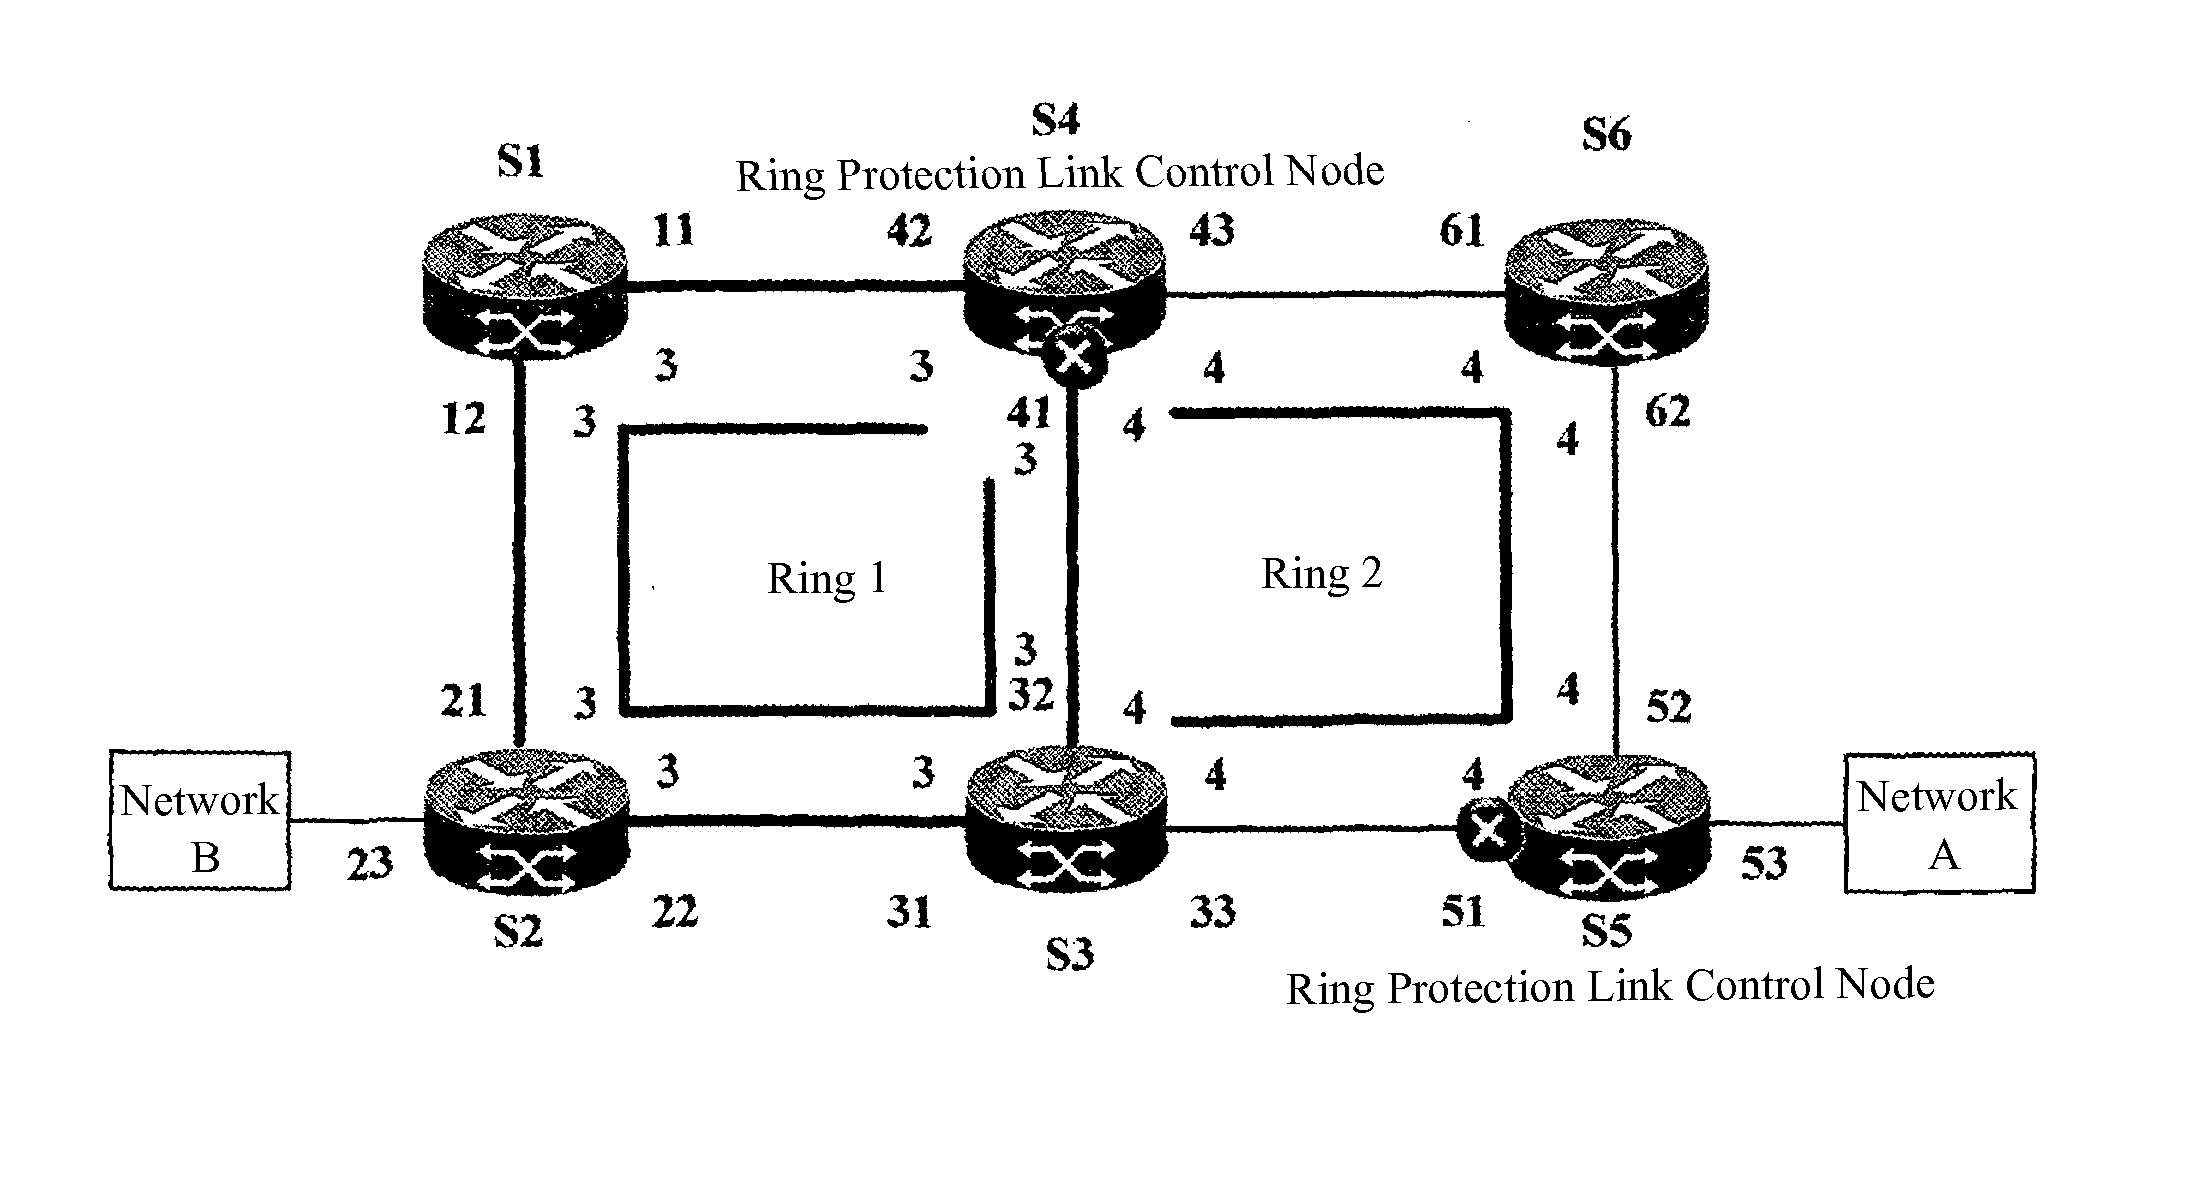 Method for forwarding protocol frames in spanning rings and a shared node of multi-rings in the Ethernet